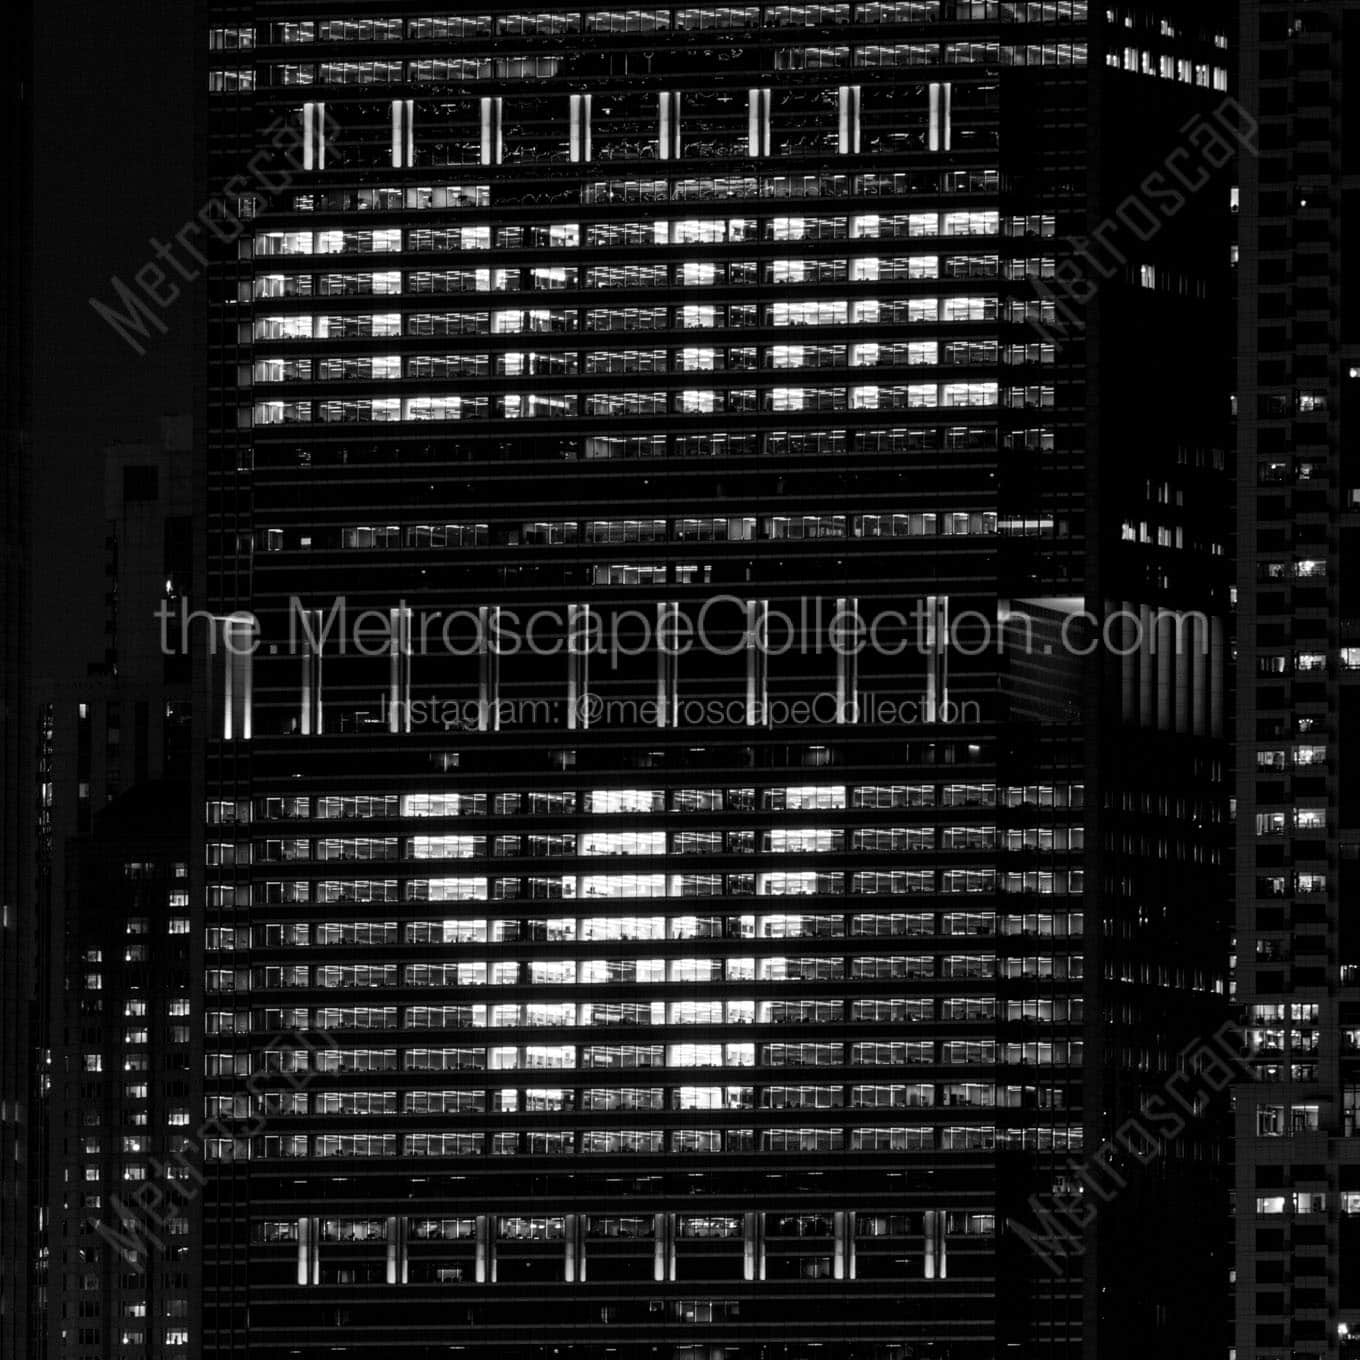 fly the w in anthem building at night Black & White Wall Art